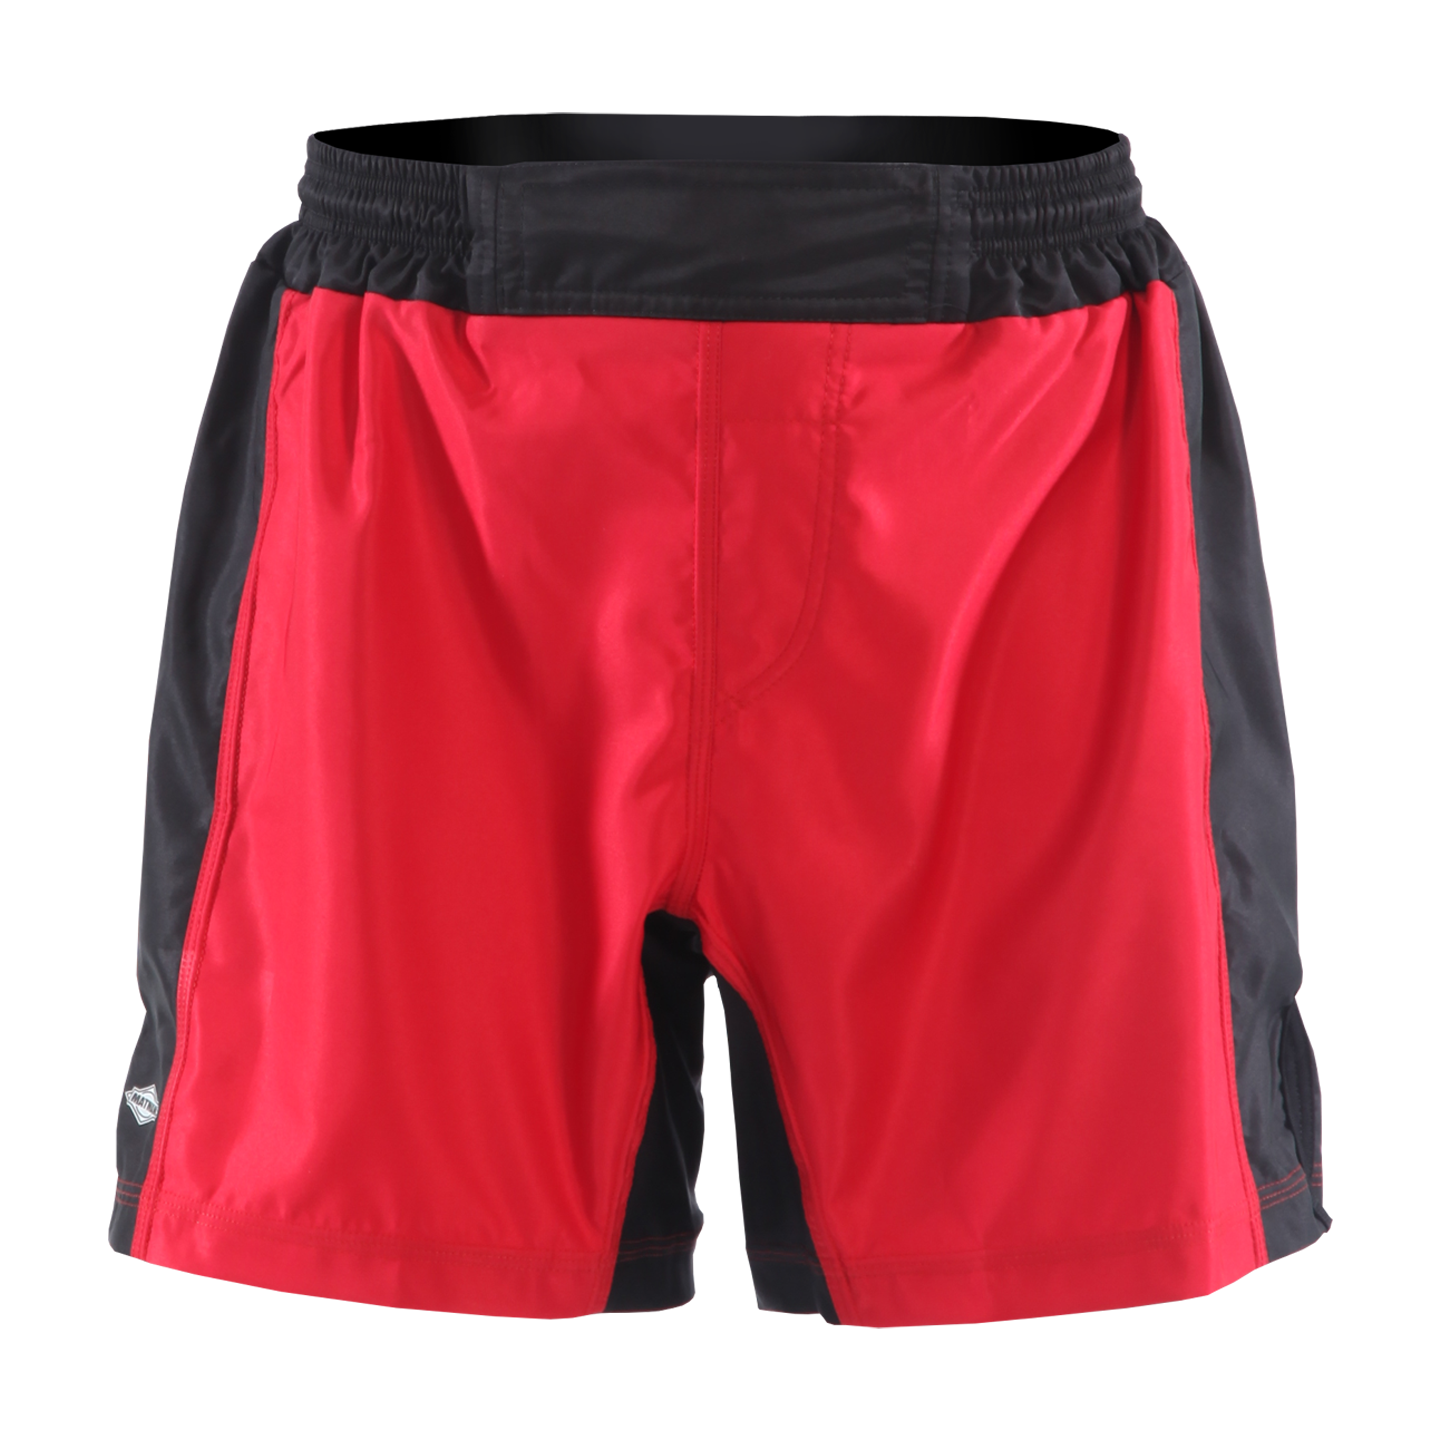 The Fight Shorts 2 Color